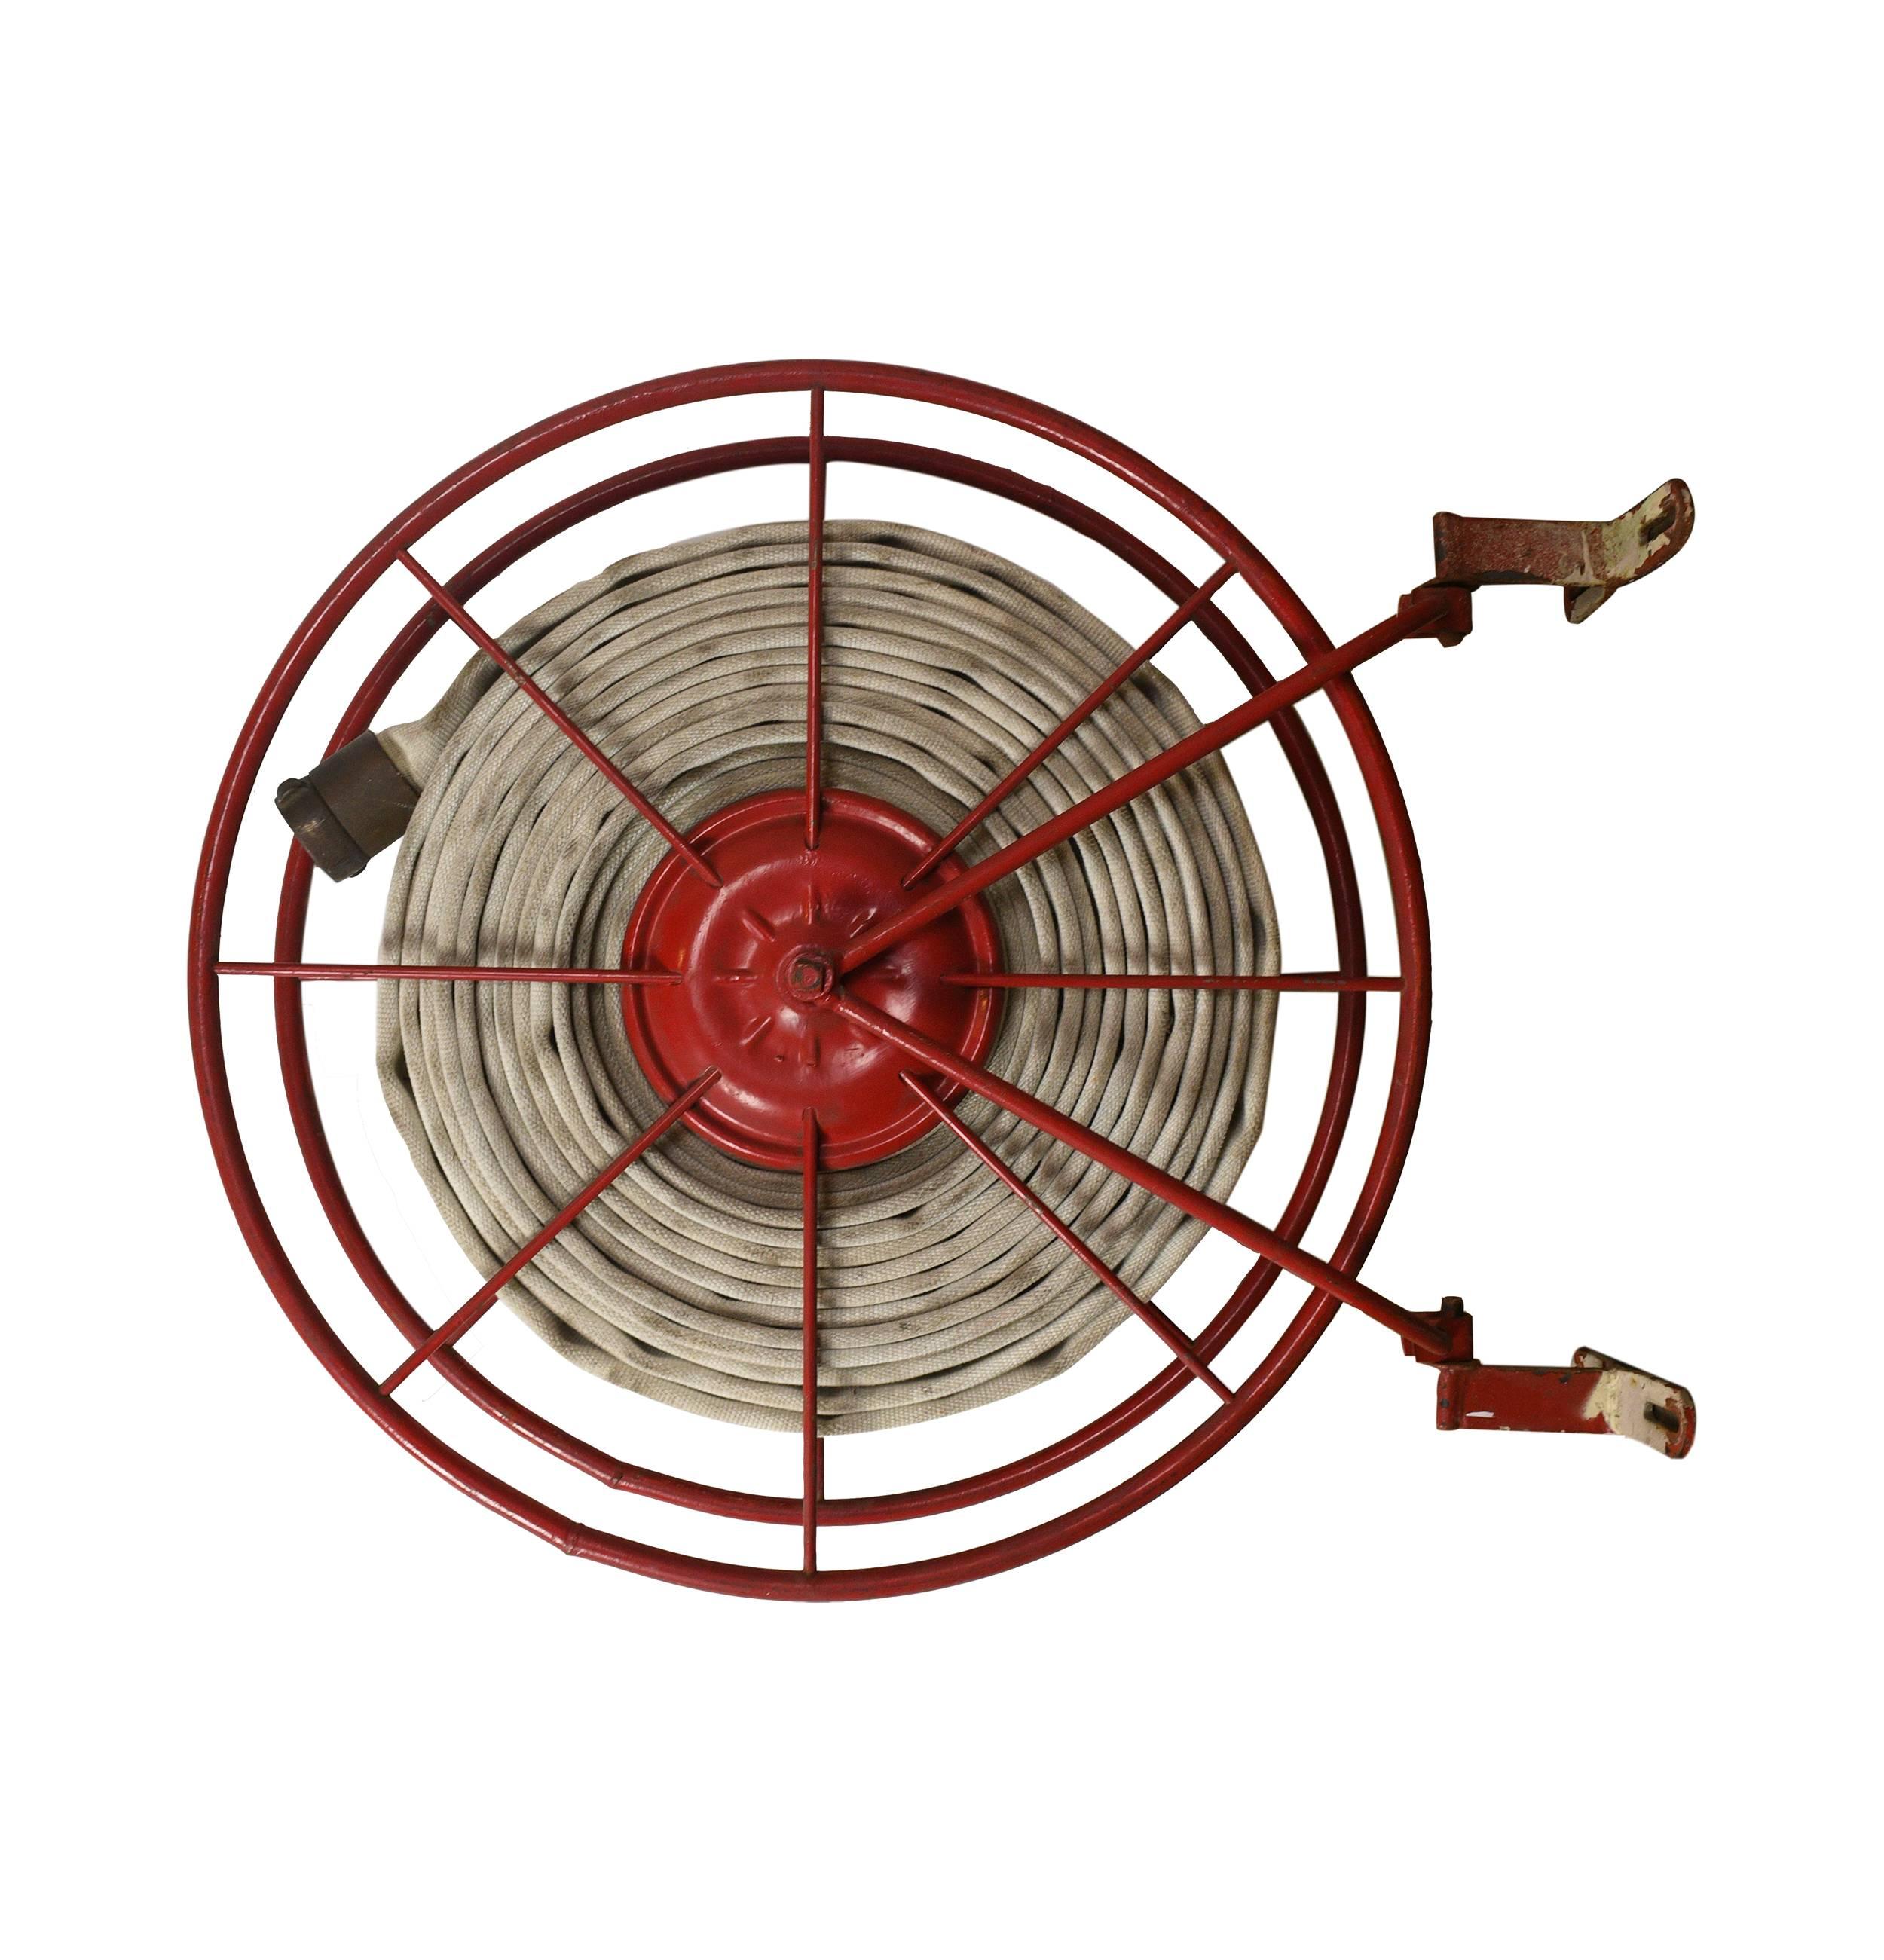 Fire hose reel with original red paint and fabric hose. Great for display purposes, or retrofit it and have the biggest, baddest garden hose on the block. 

We have eight reels available, sold separately. The hoses range between 50 and 75